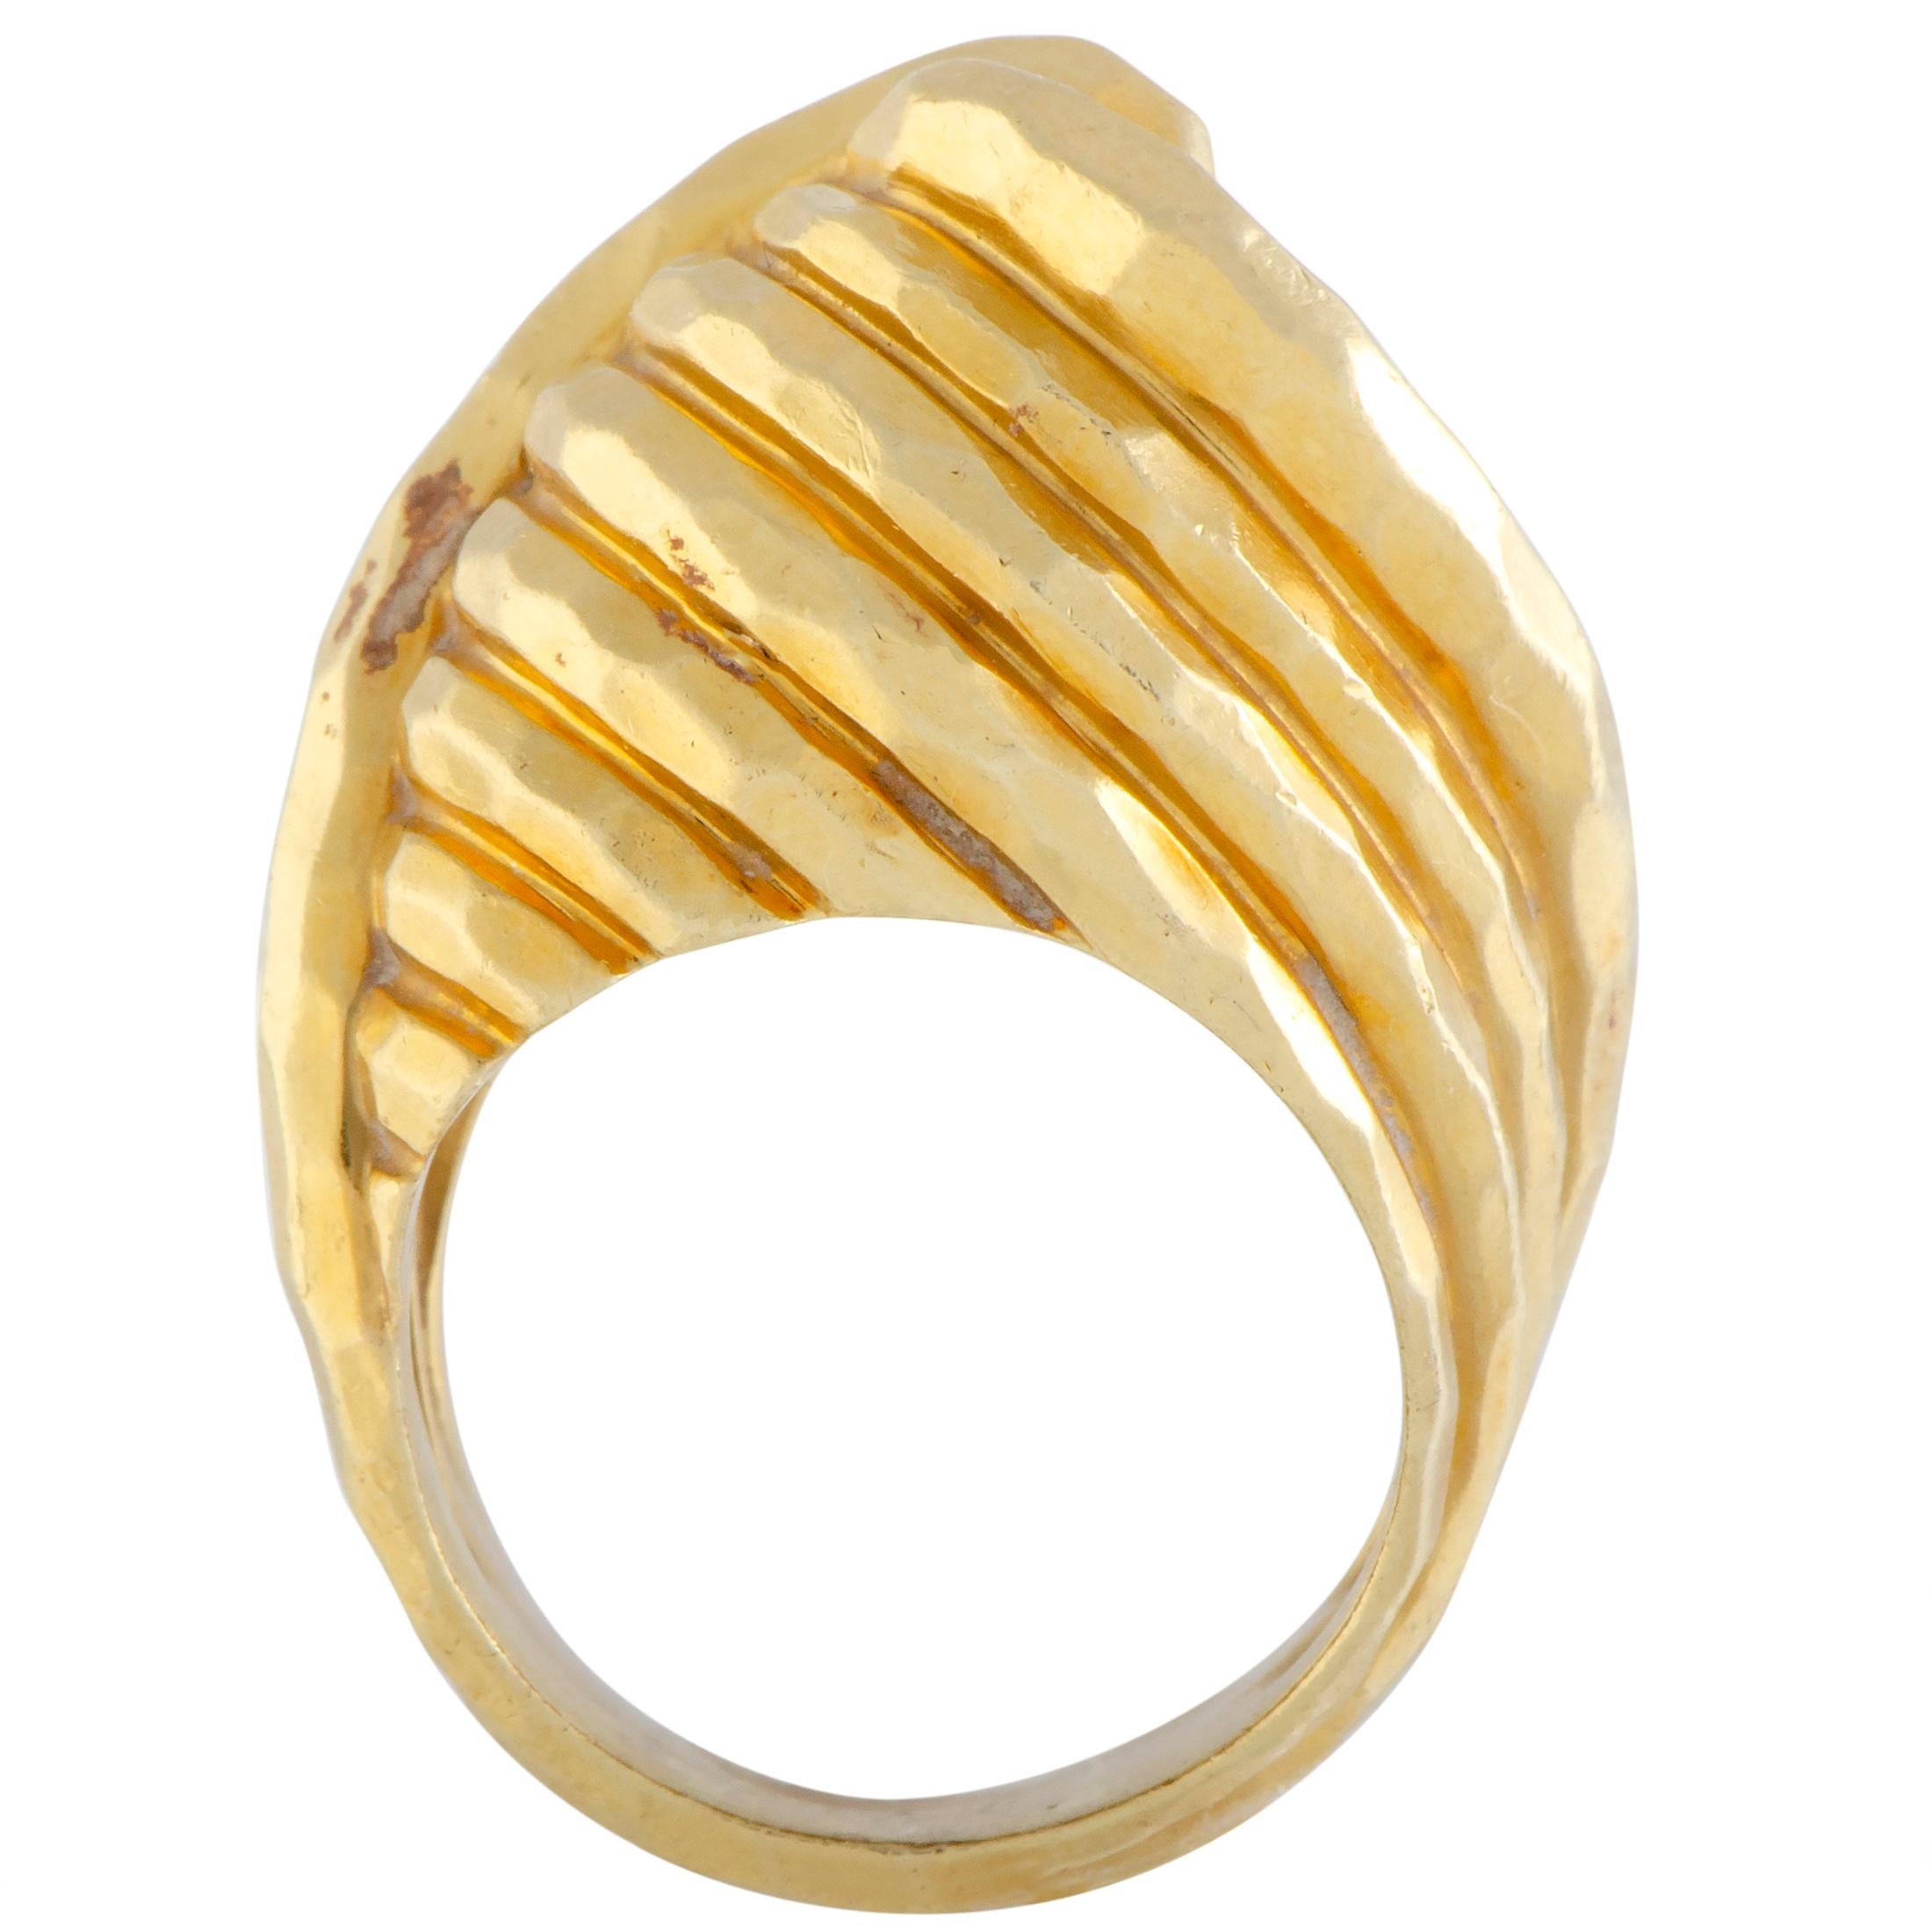 A stunningly offbeat design is luxuriously presented in attractive gold in this exemplary jewelry piece that will accentuate your look in an incredibly fashionable manner. The ring is a Henry Dunay creation and it is made of radiant 18K yellow